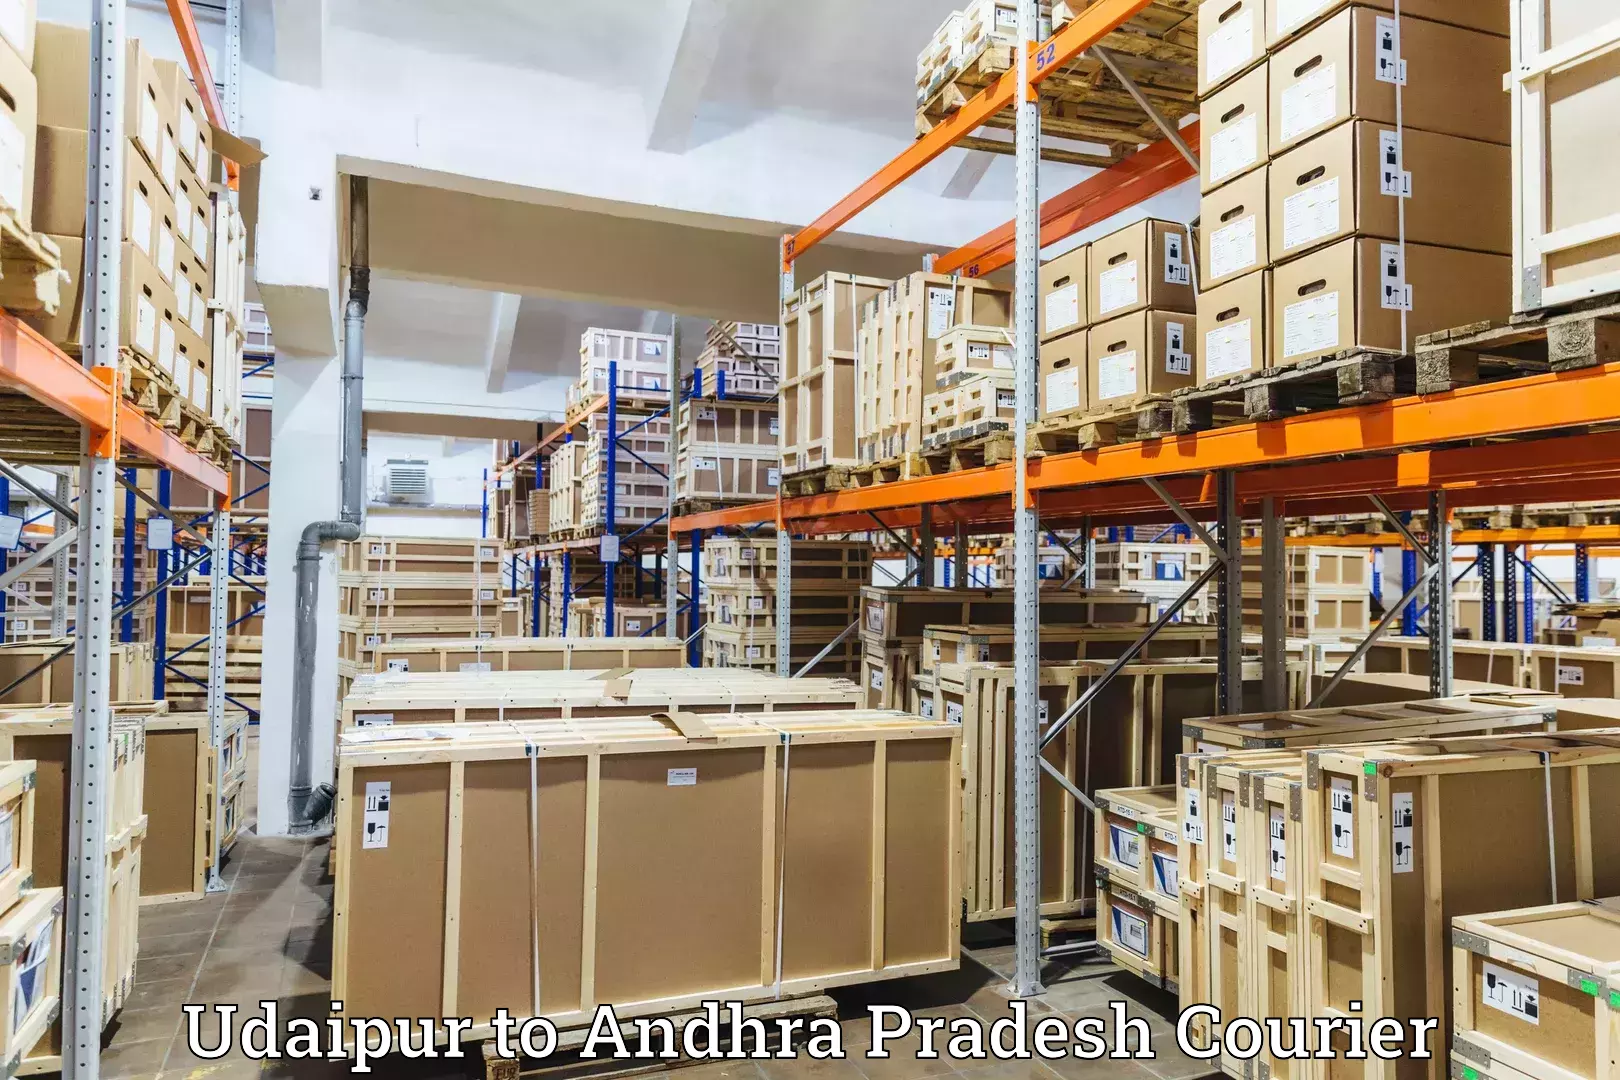 Global shipping solutions Udaipur to Mangalagiri